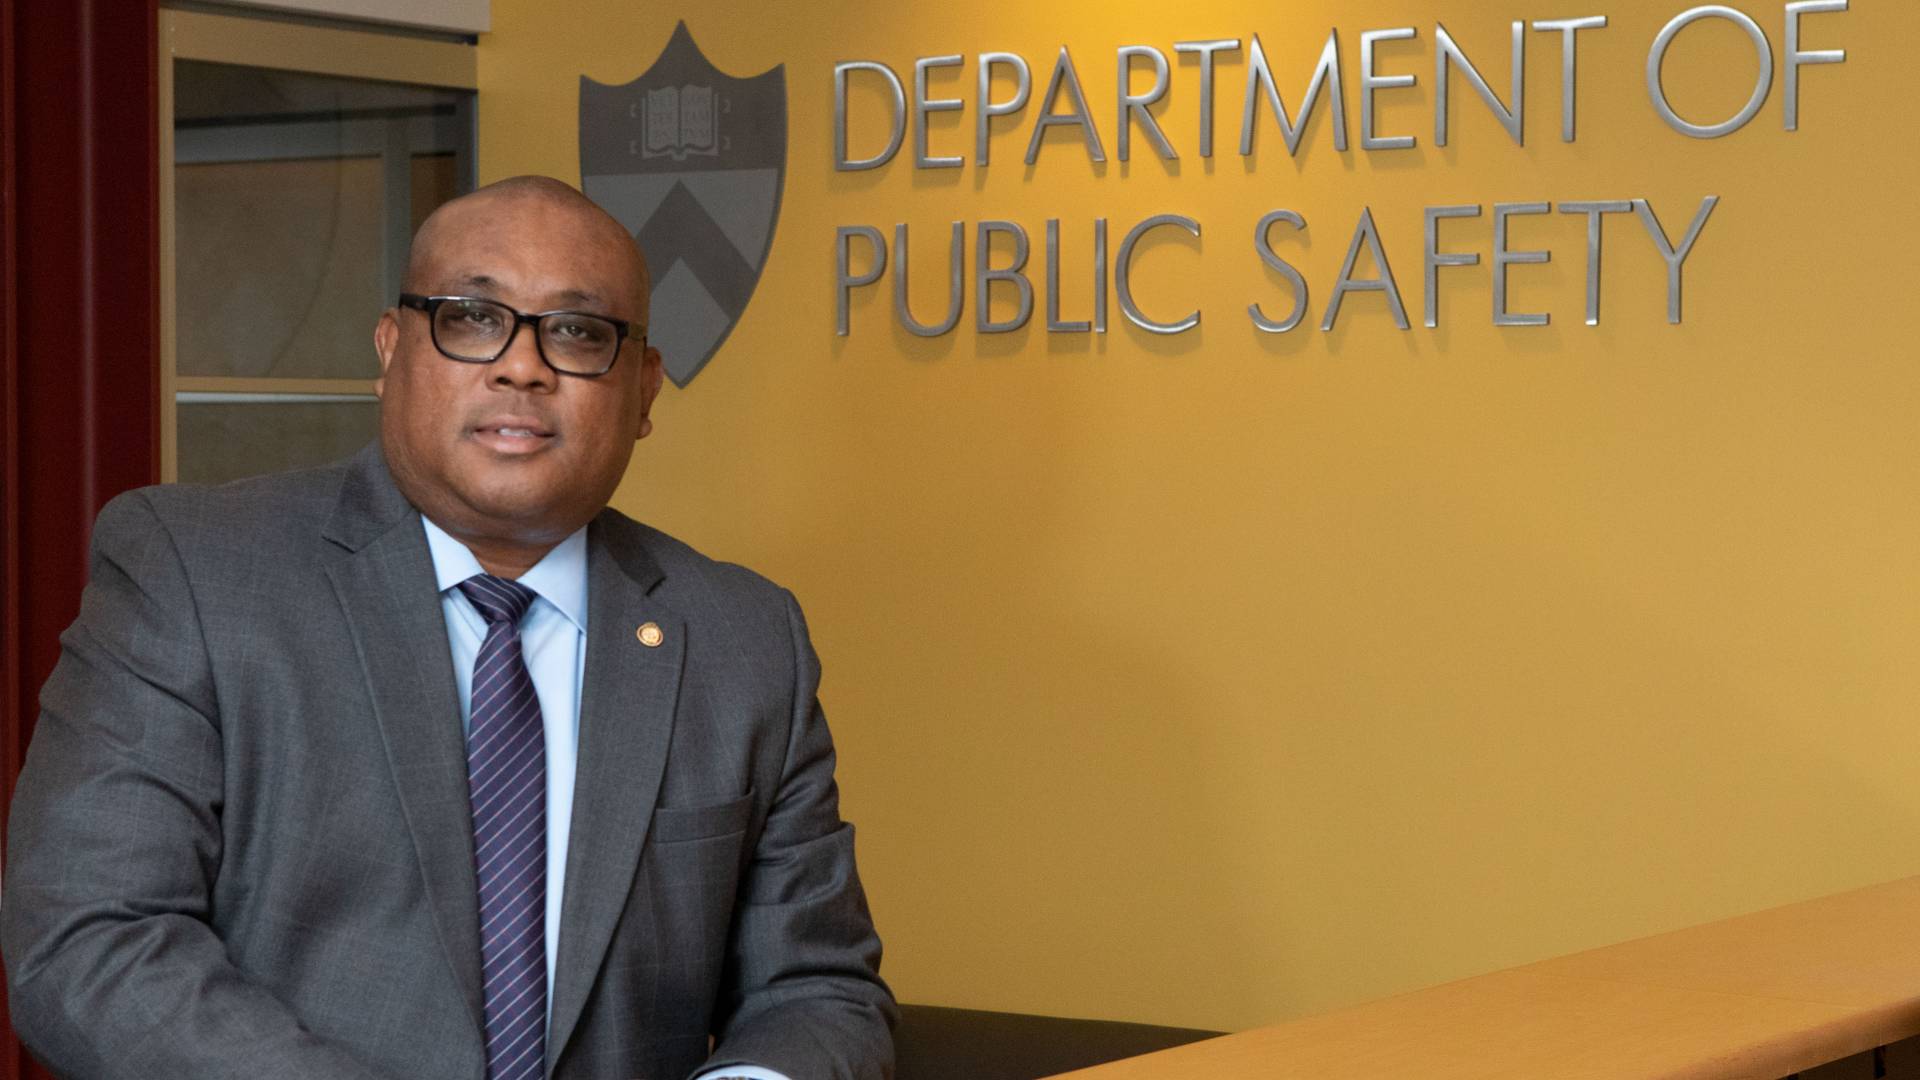 Kenneth Strother Jr standing by Department of Public Safety sign